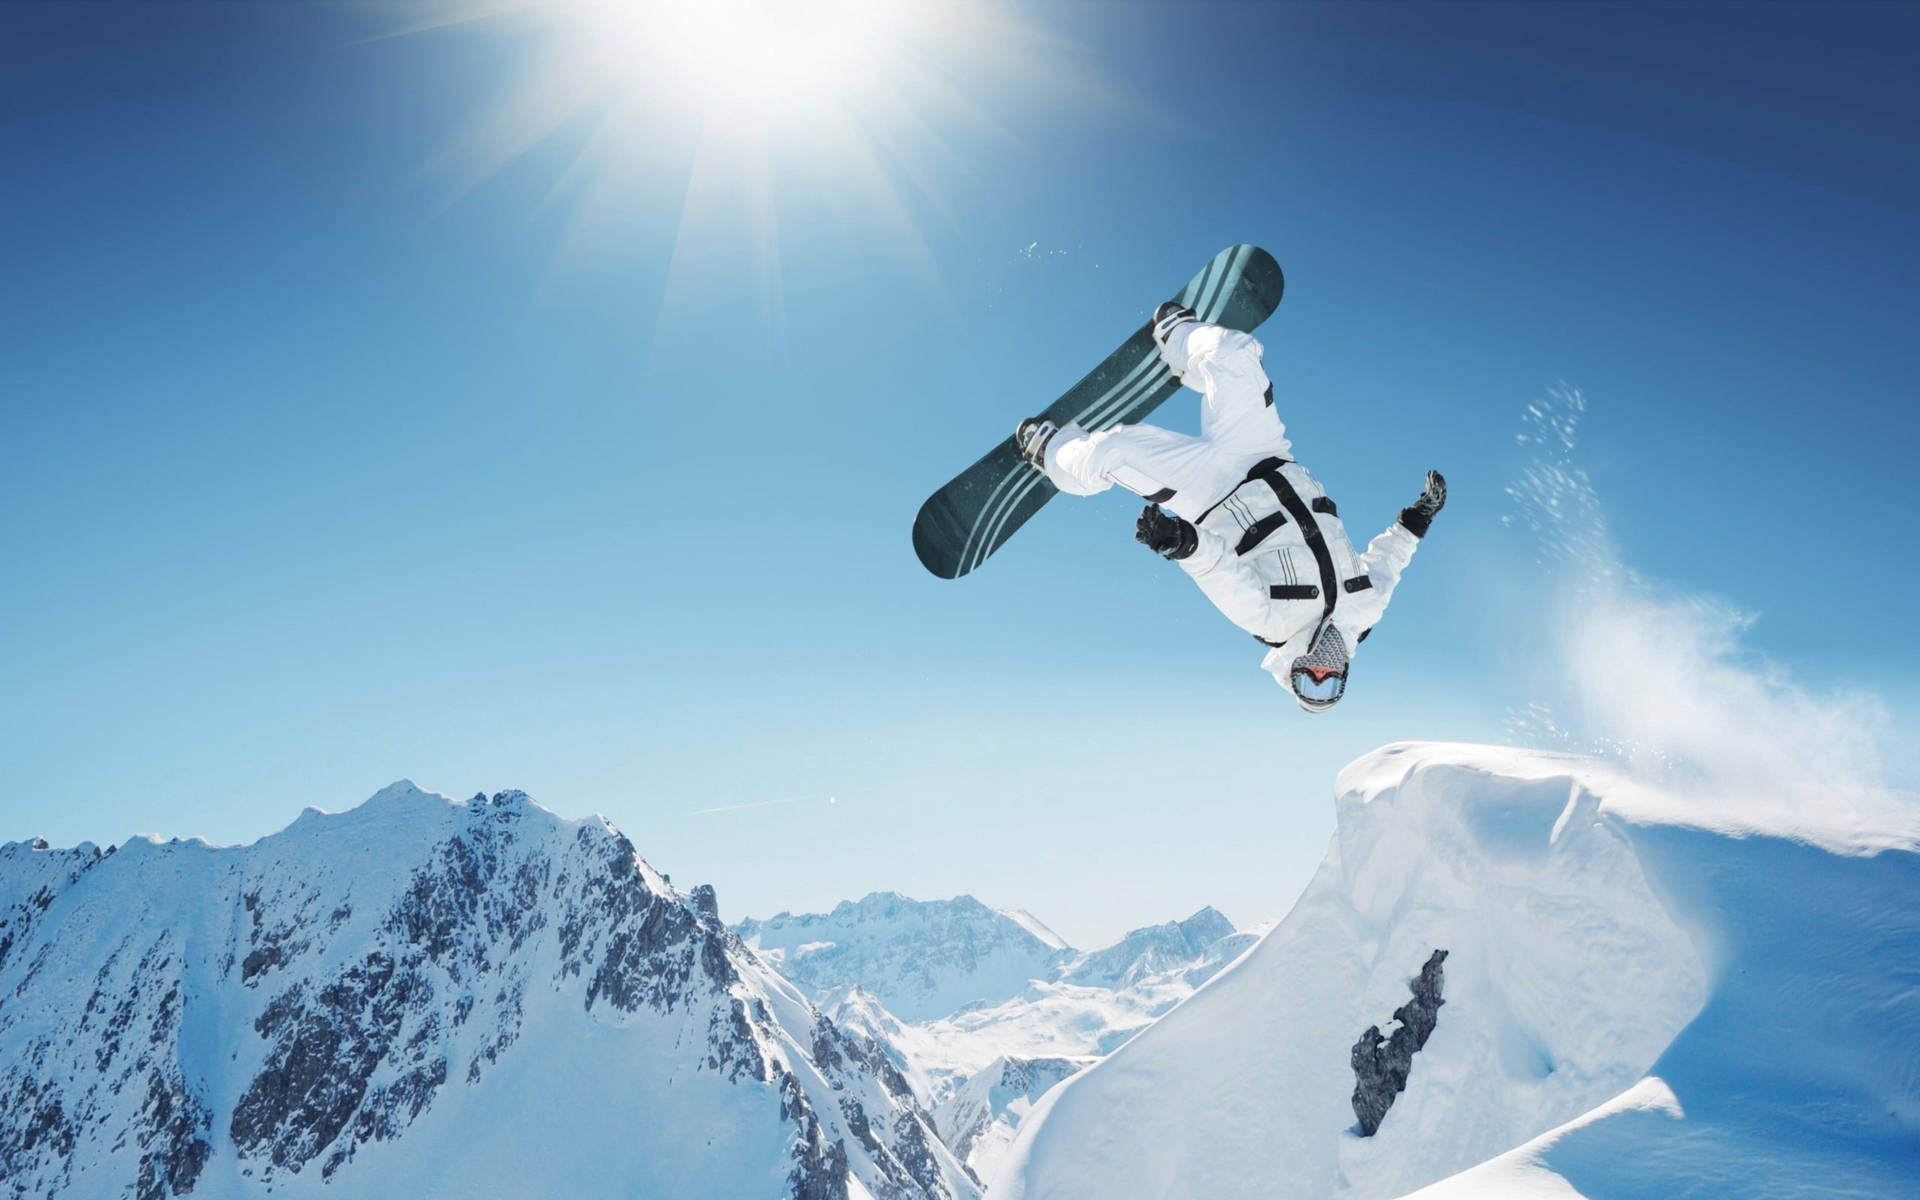 Extreme Sports Snowboarding Jump Picture